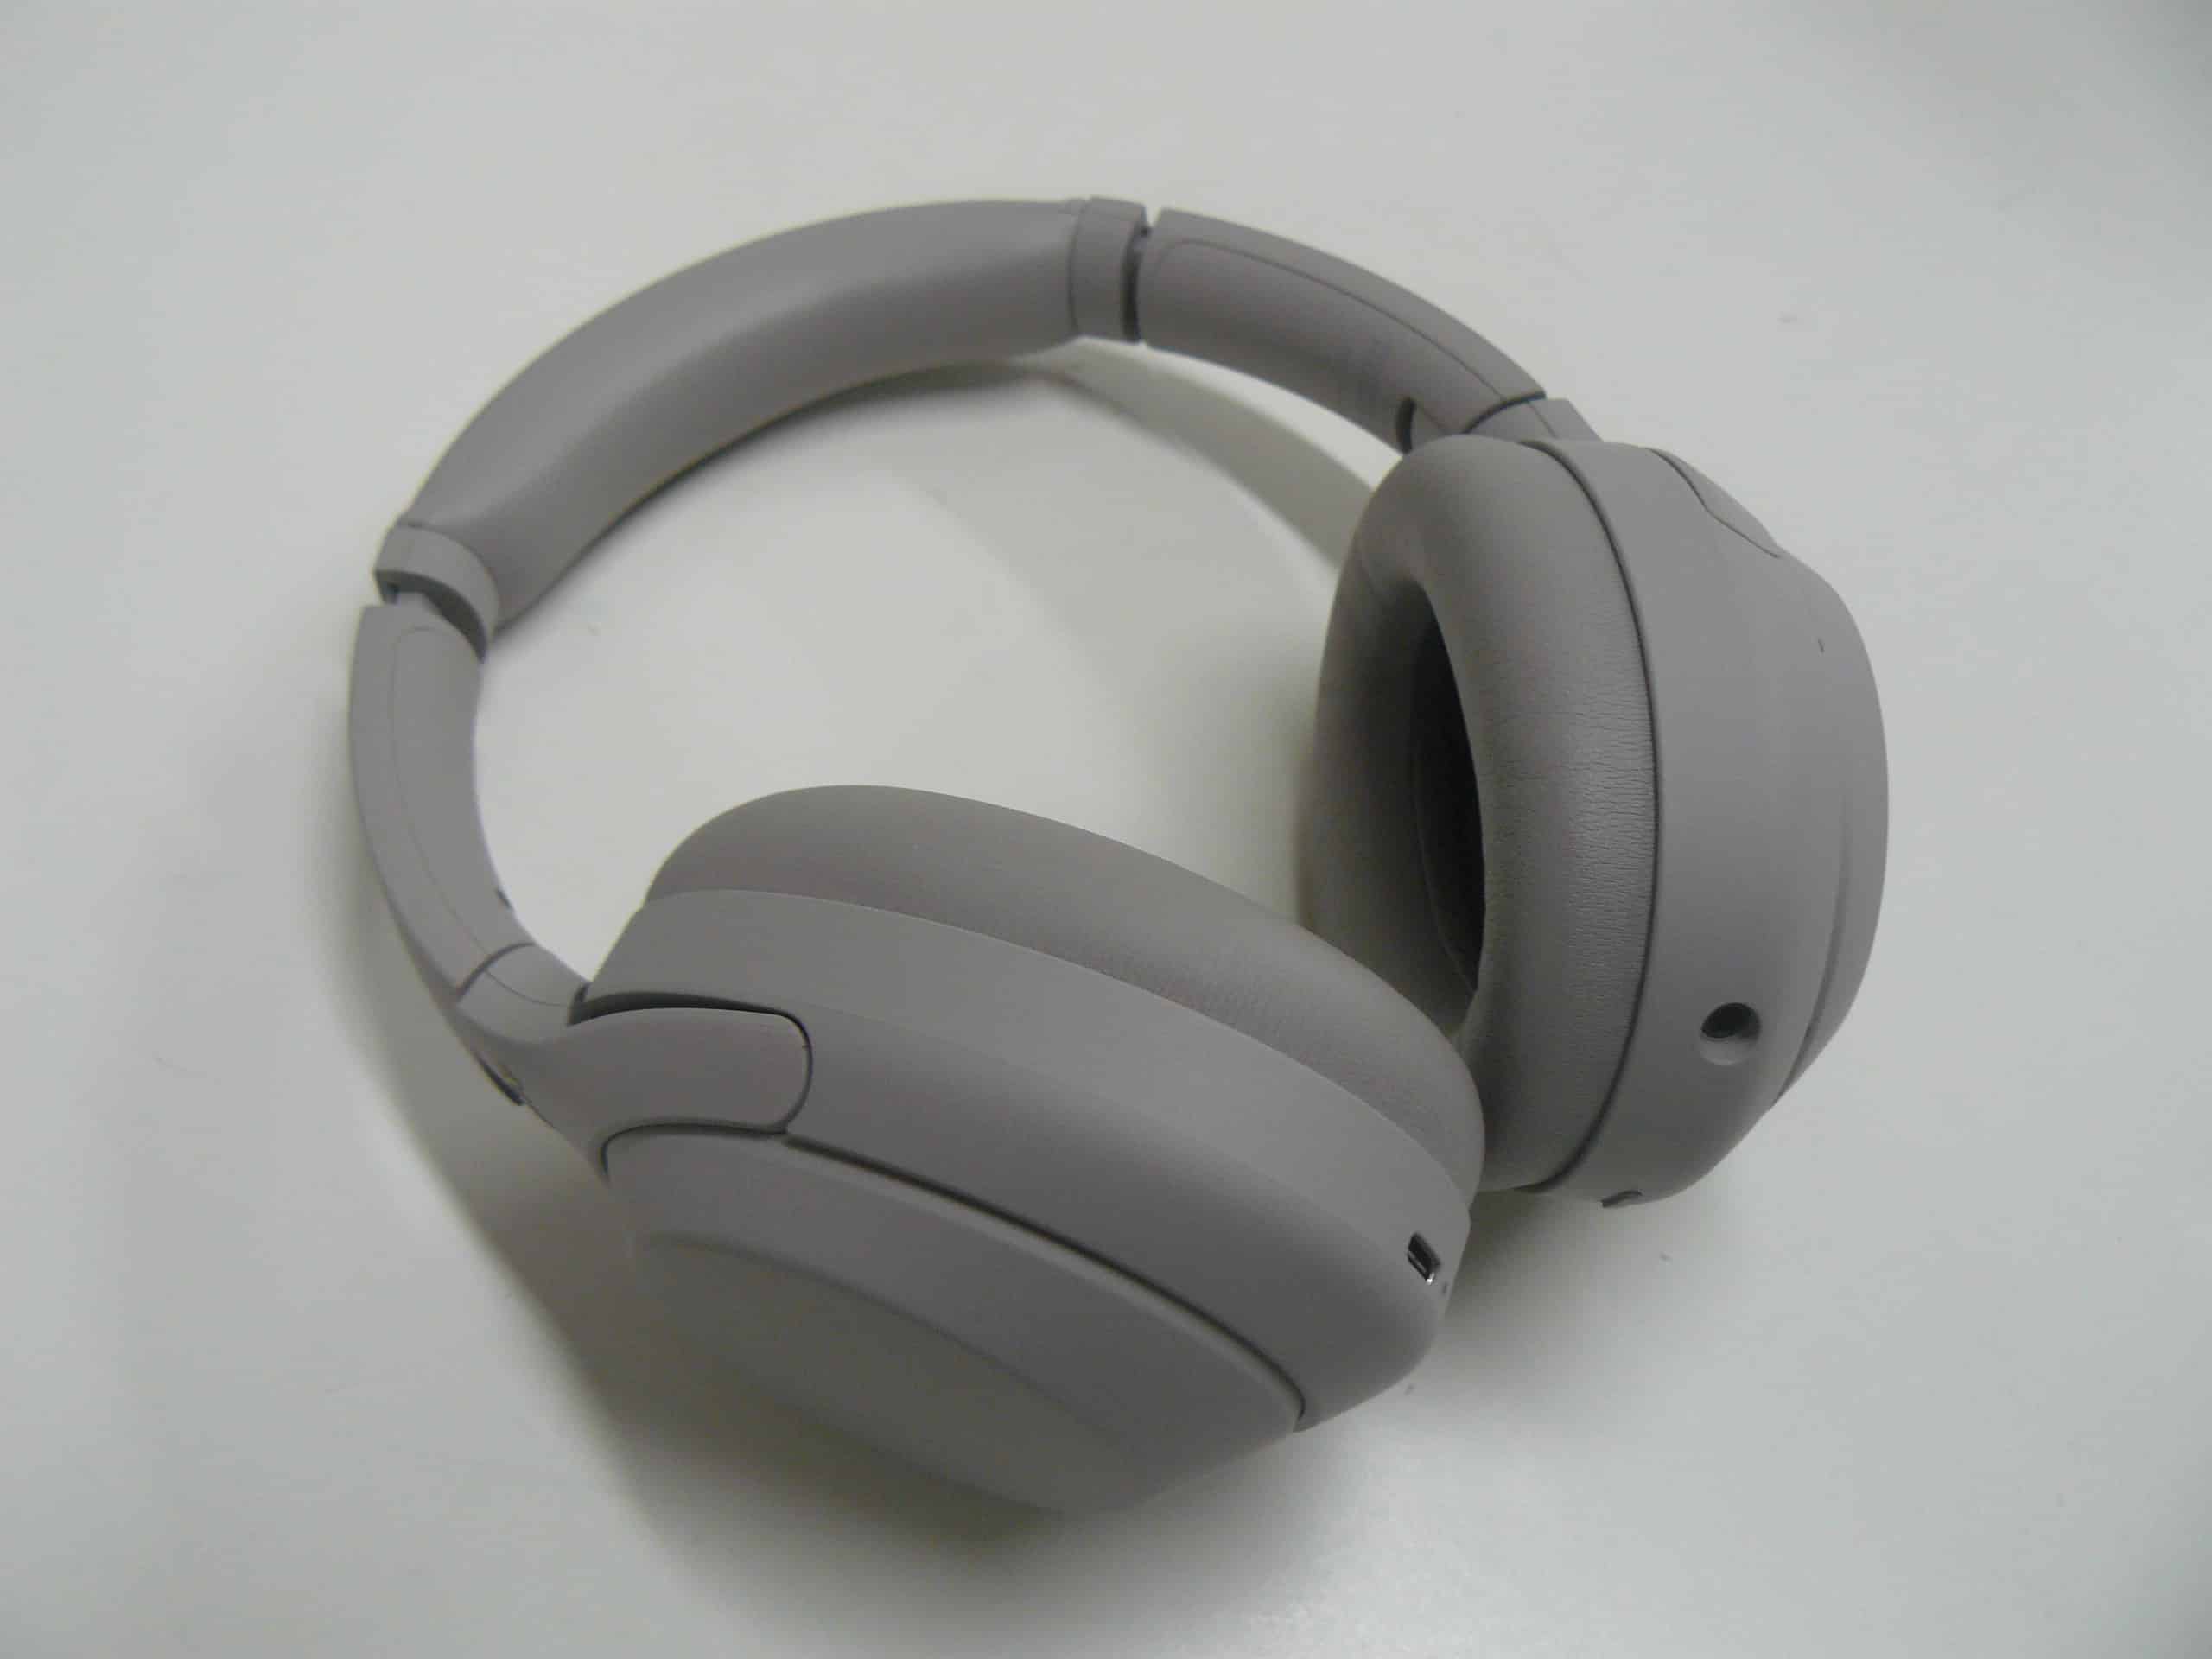 Sony WH-1000XM4 Wireless Noise-Canceling Headphone Review 